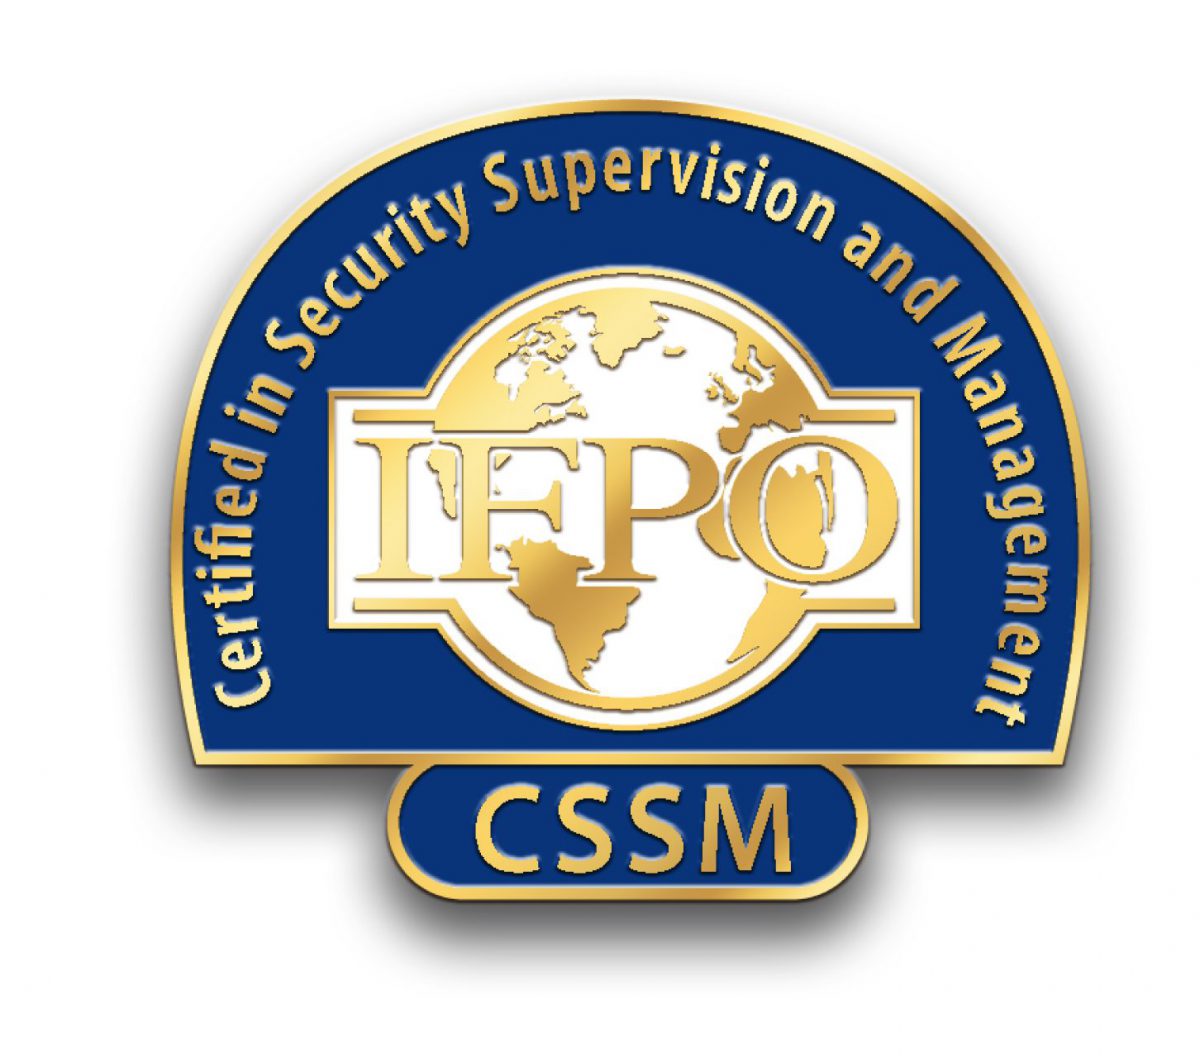 Netherlands-based security entrepreneur earns CSSM from the IFPO